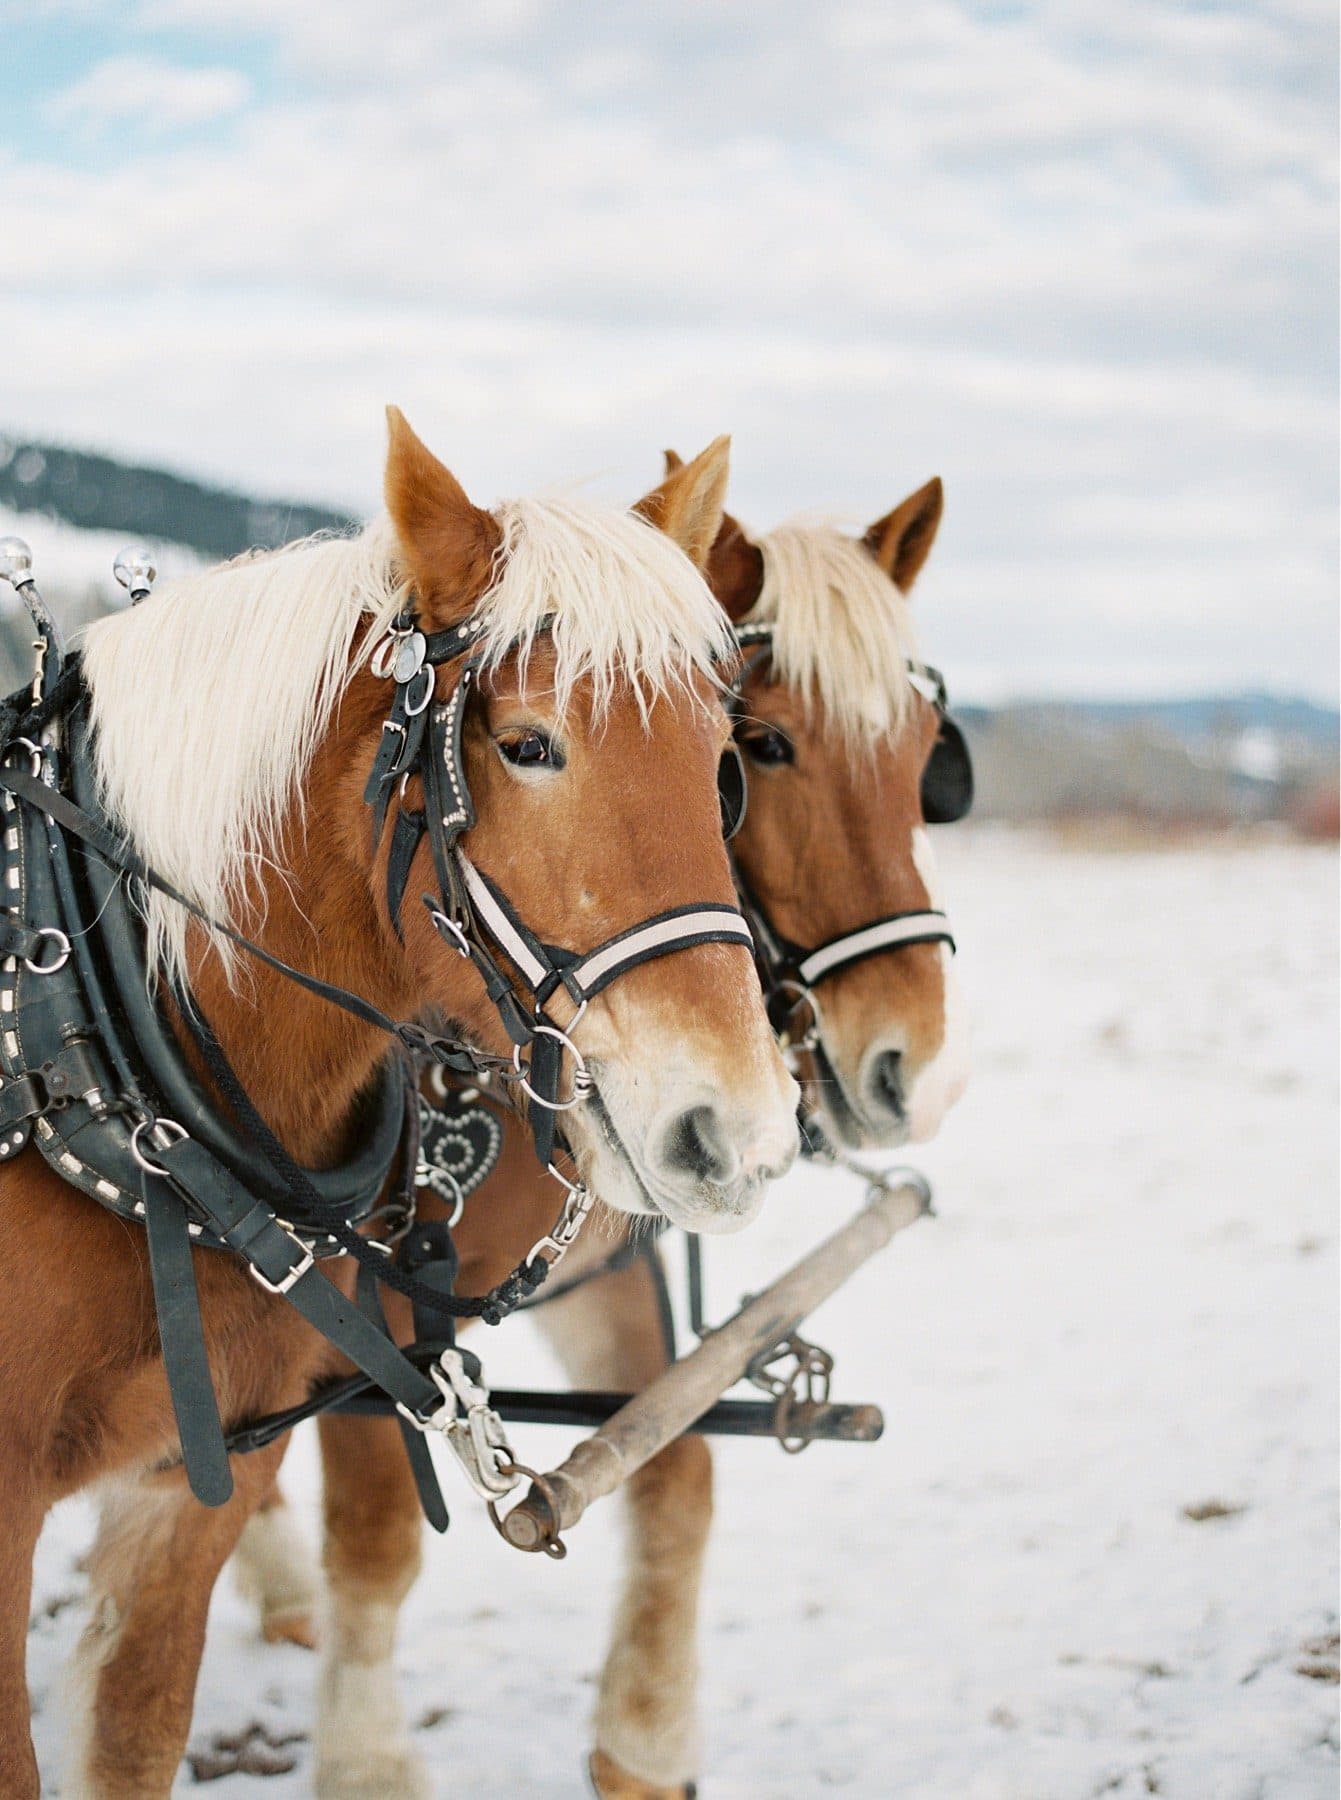 Two horses in harnesses in a snowy field